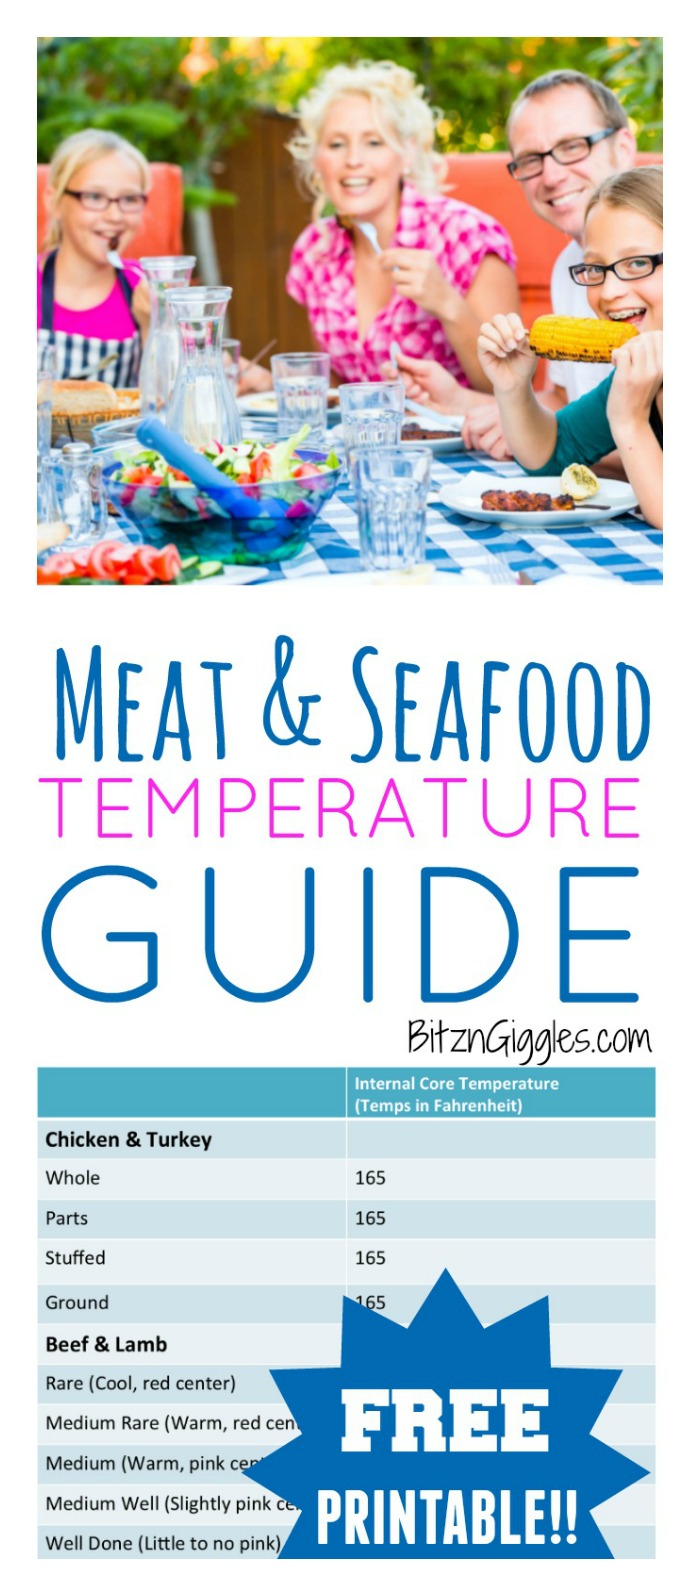 Meat and Seafood Temperature Guide - What a lifesaver this FREE printable is when cooking in the kitchen or grilling out on the patio! This is such a great chart to have on hand to reference!